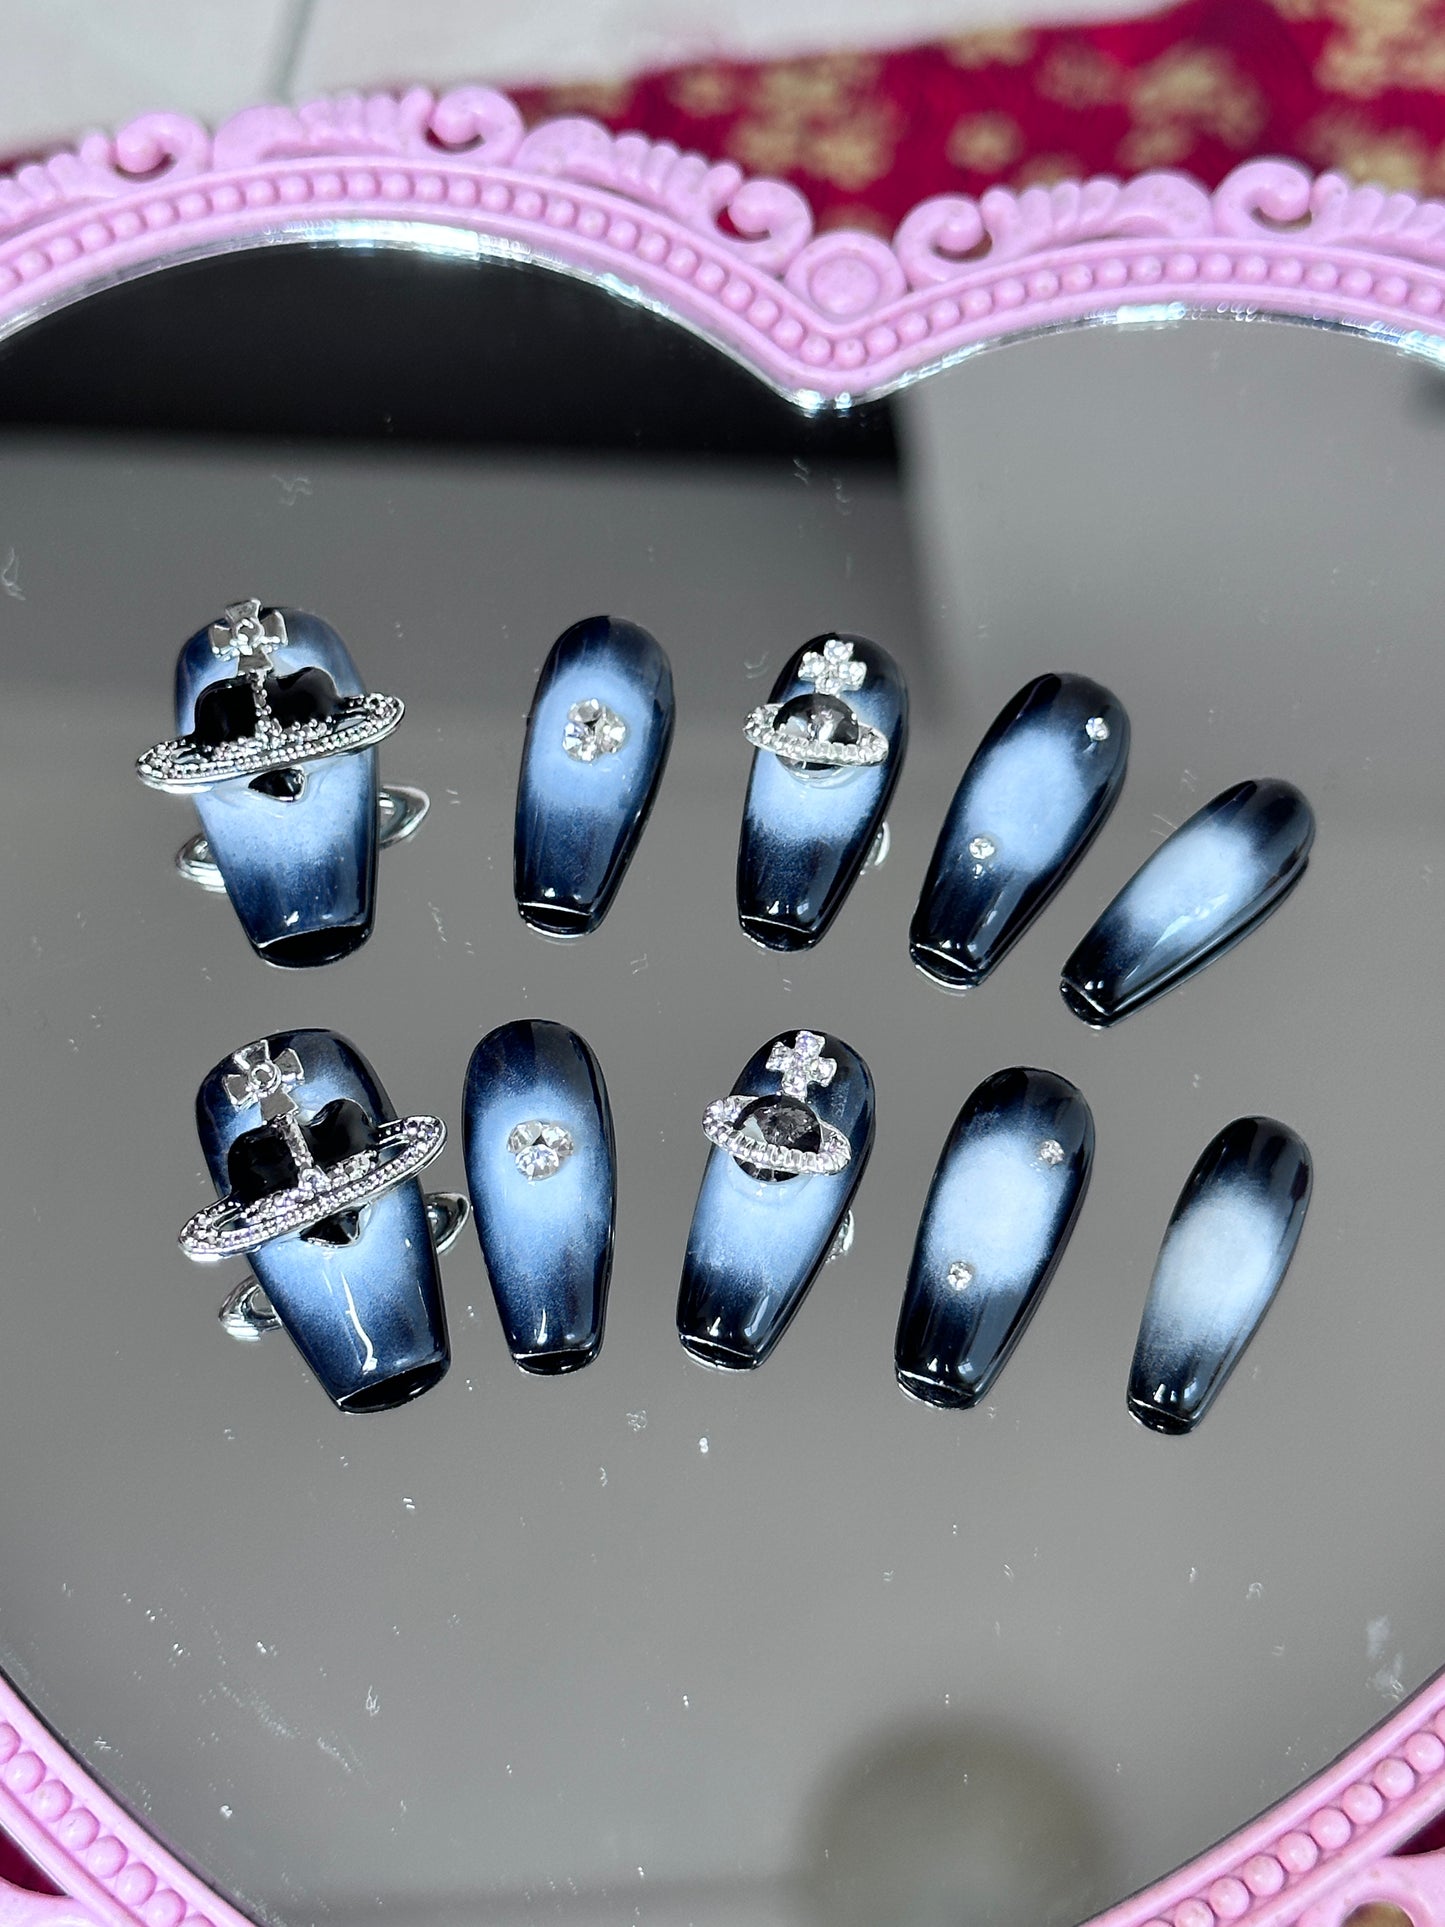 Blue Empress Dowager's nails